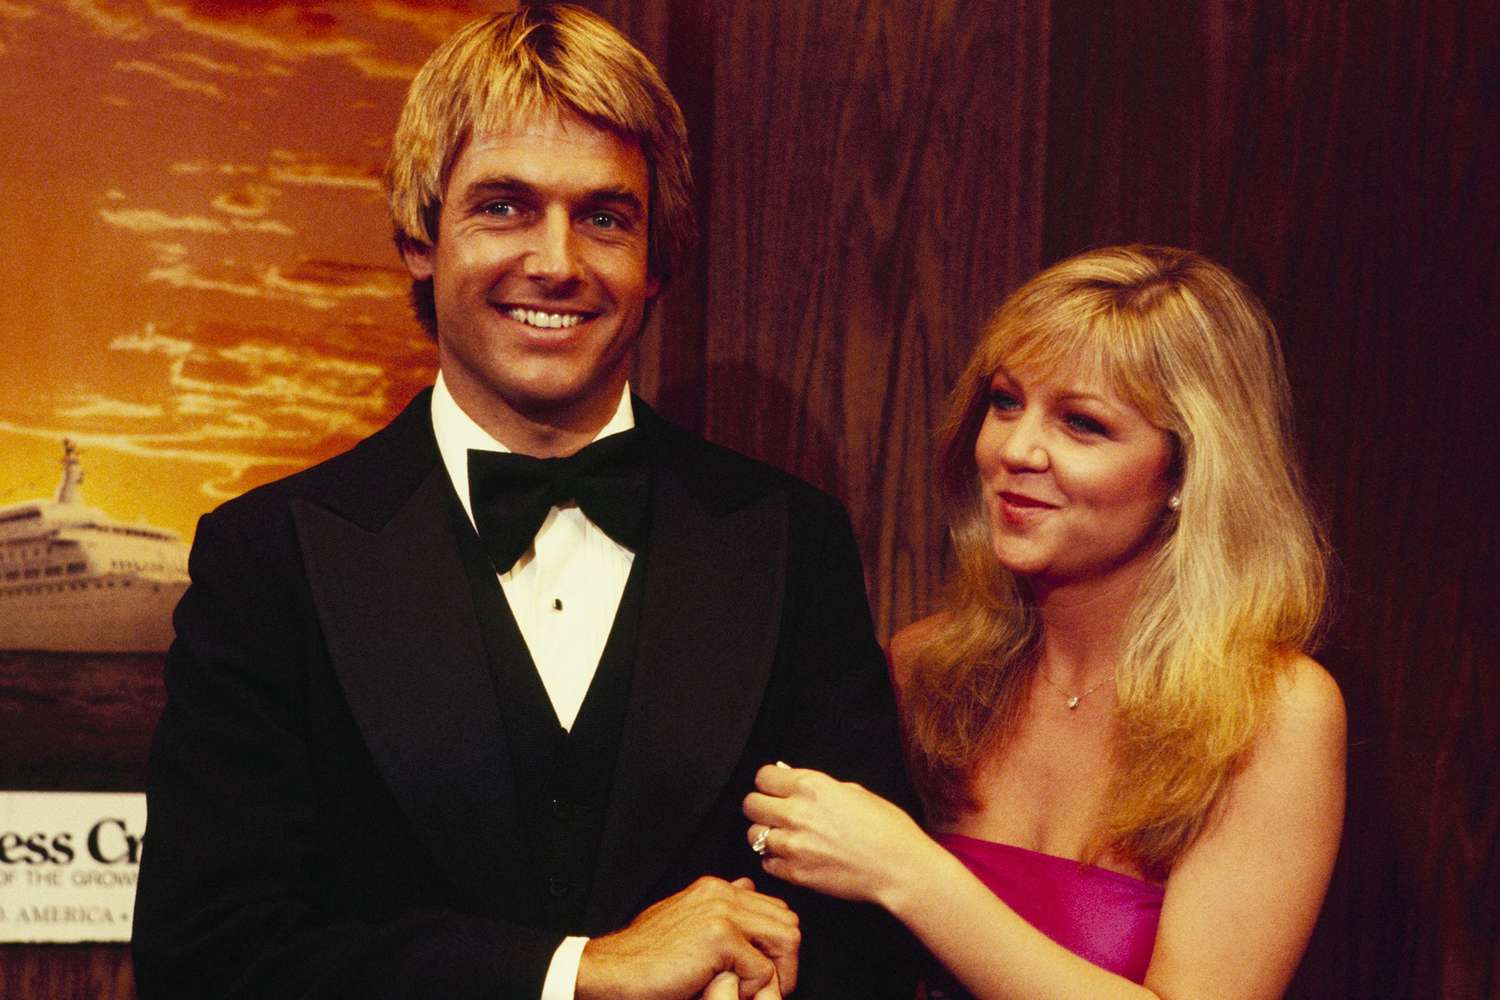 LOVE BOAT - "The Wedding: Caroly and Doug's Story/Peter and Alicia's Story/Julie's Story/Buddy and Portia's Story: Part 2" which aired on September 15, 1979. (Photo by ABC Photo Archives/Disney General Entertainment Content via Getty Images) MARK HARMON;LISA HARTMAN